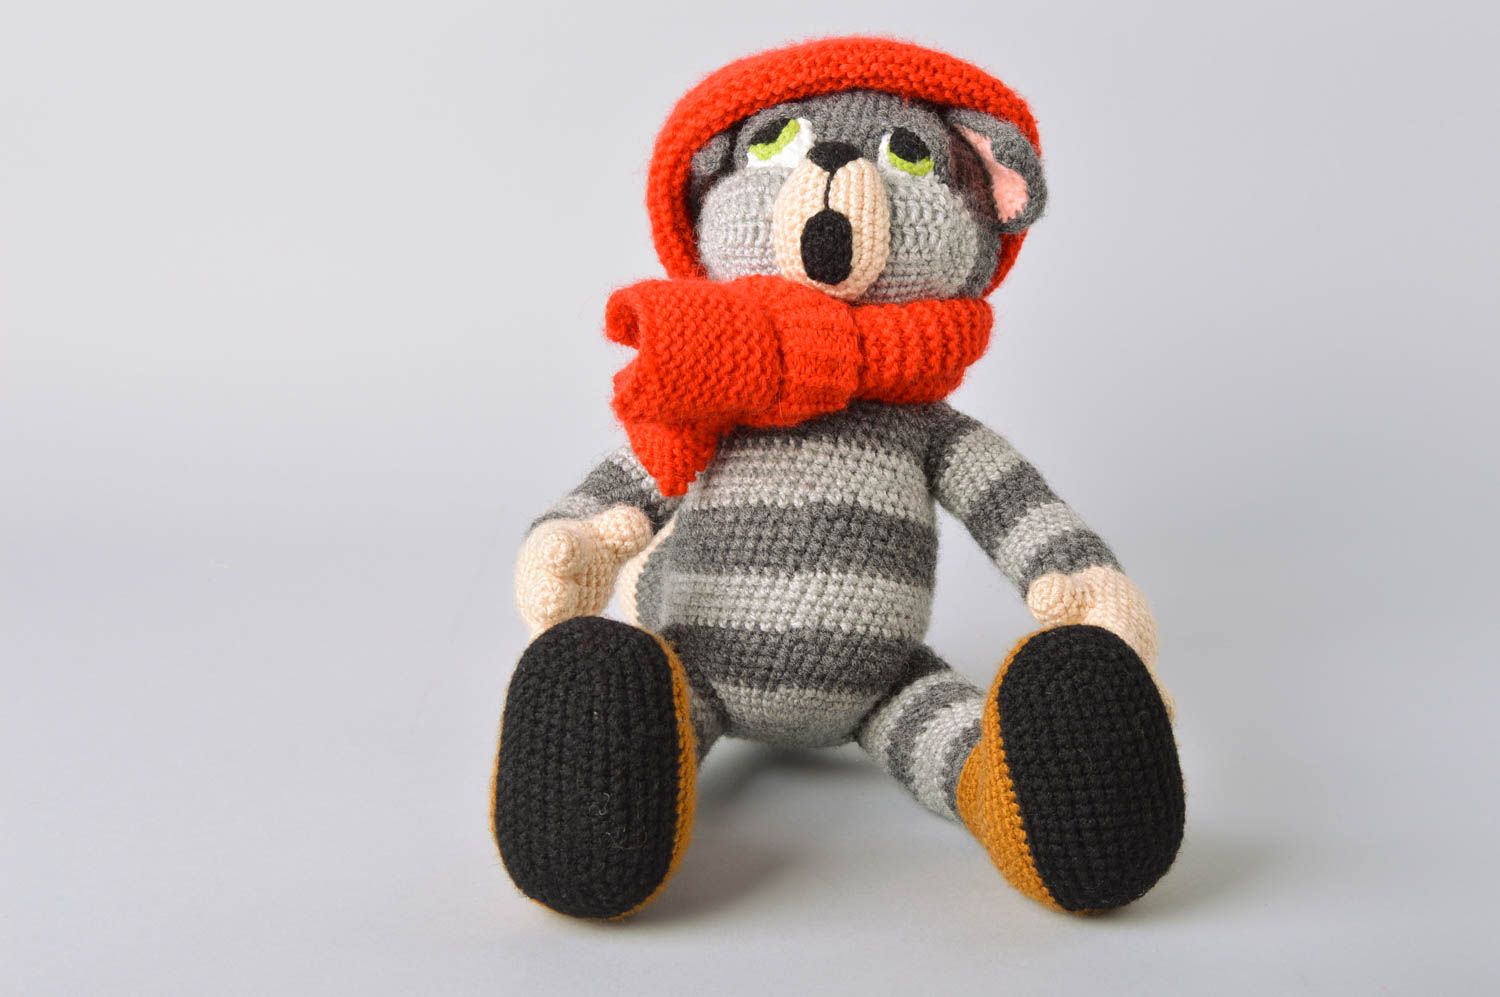 Handmade designer crochet toy striped gray cat in red hat and scarf photo 3